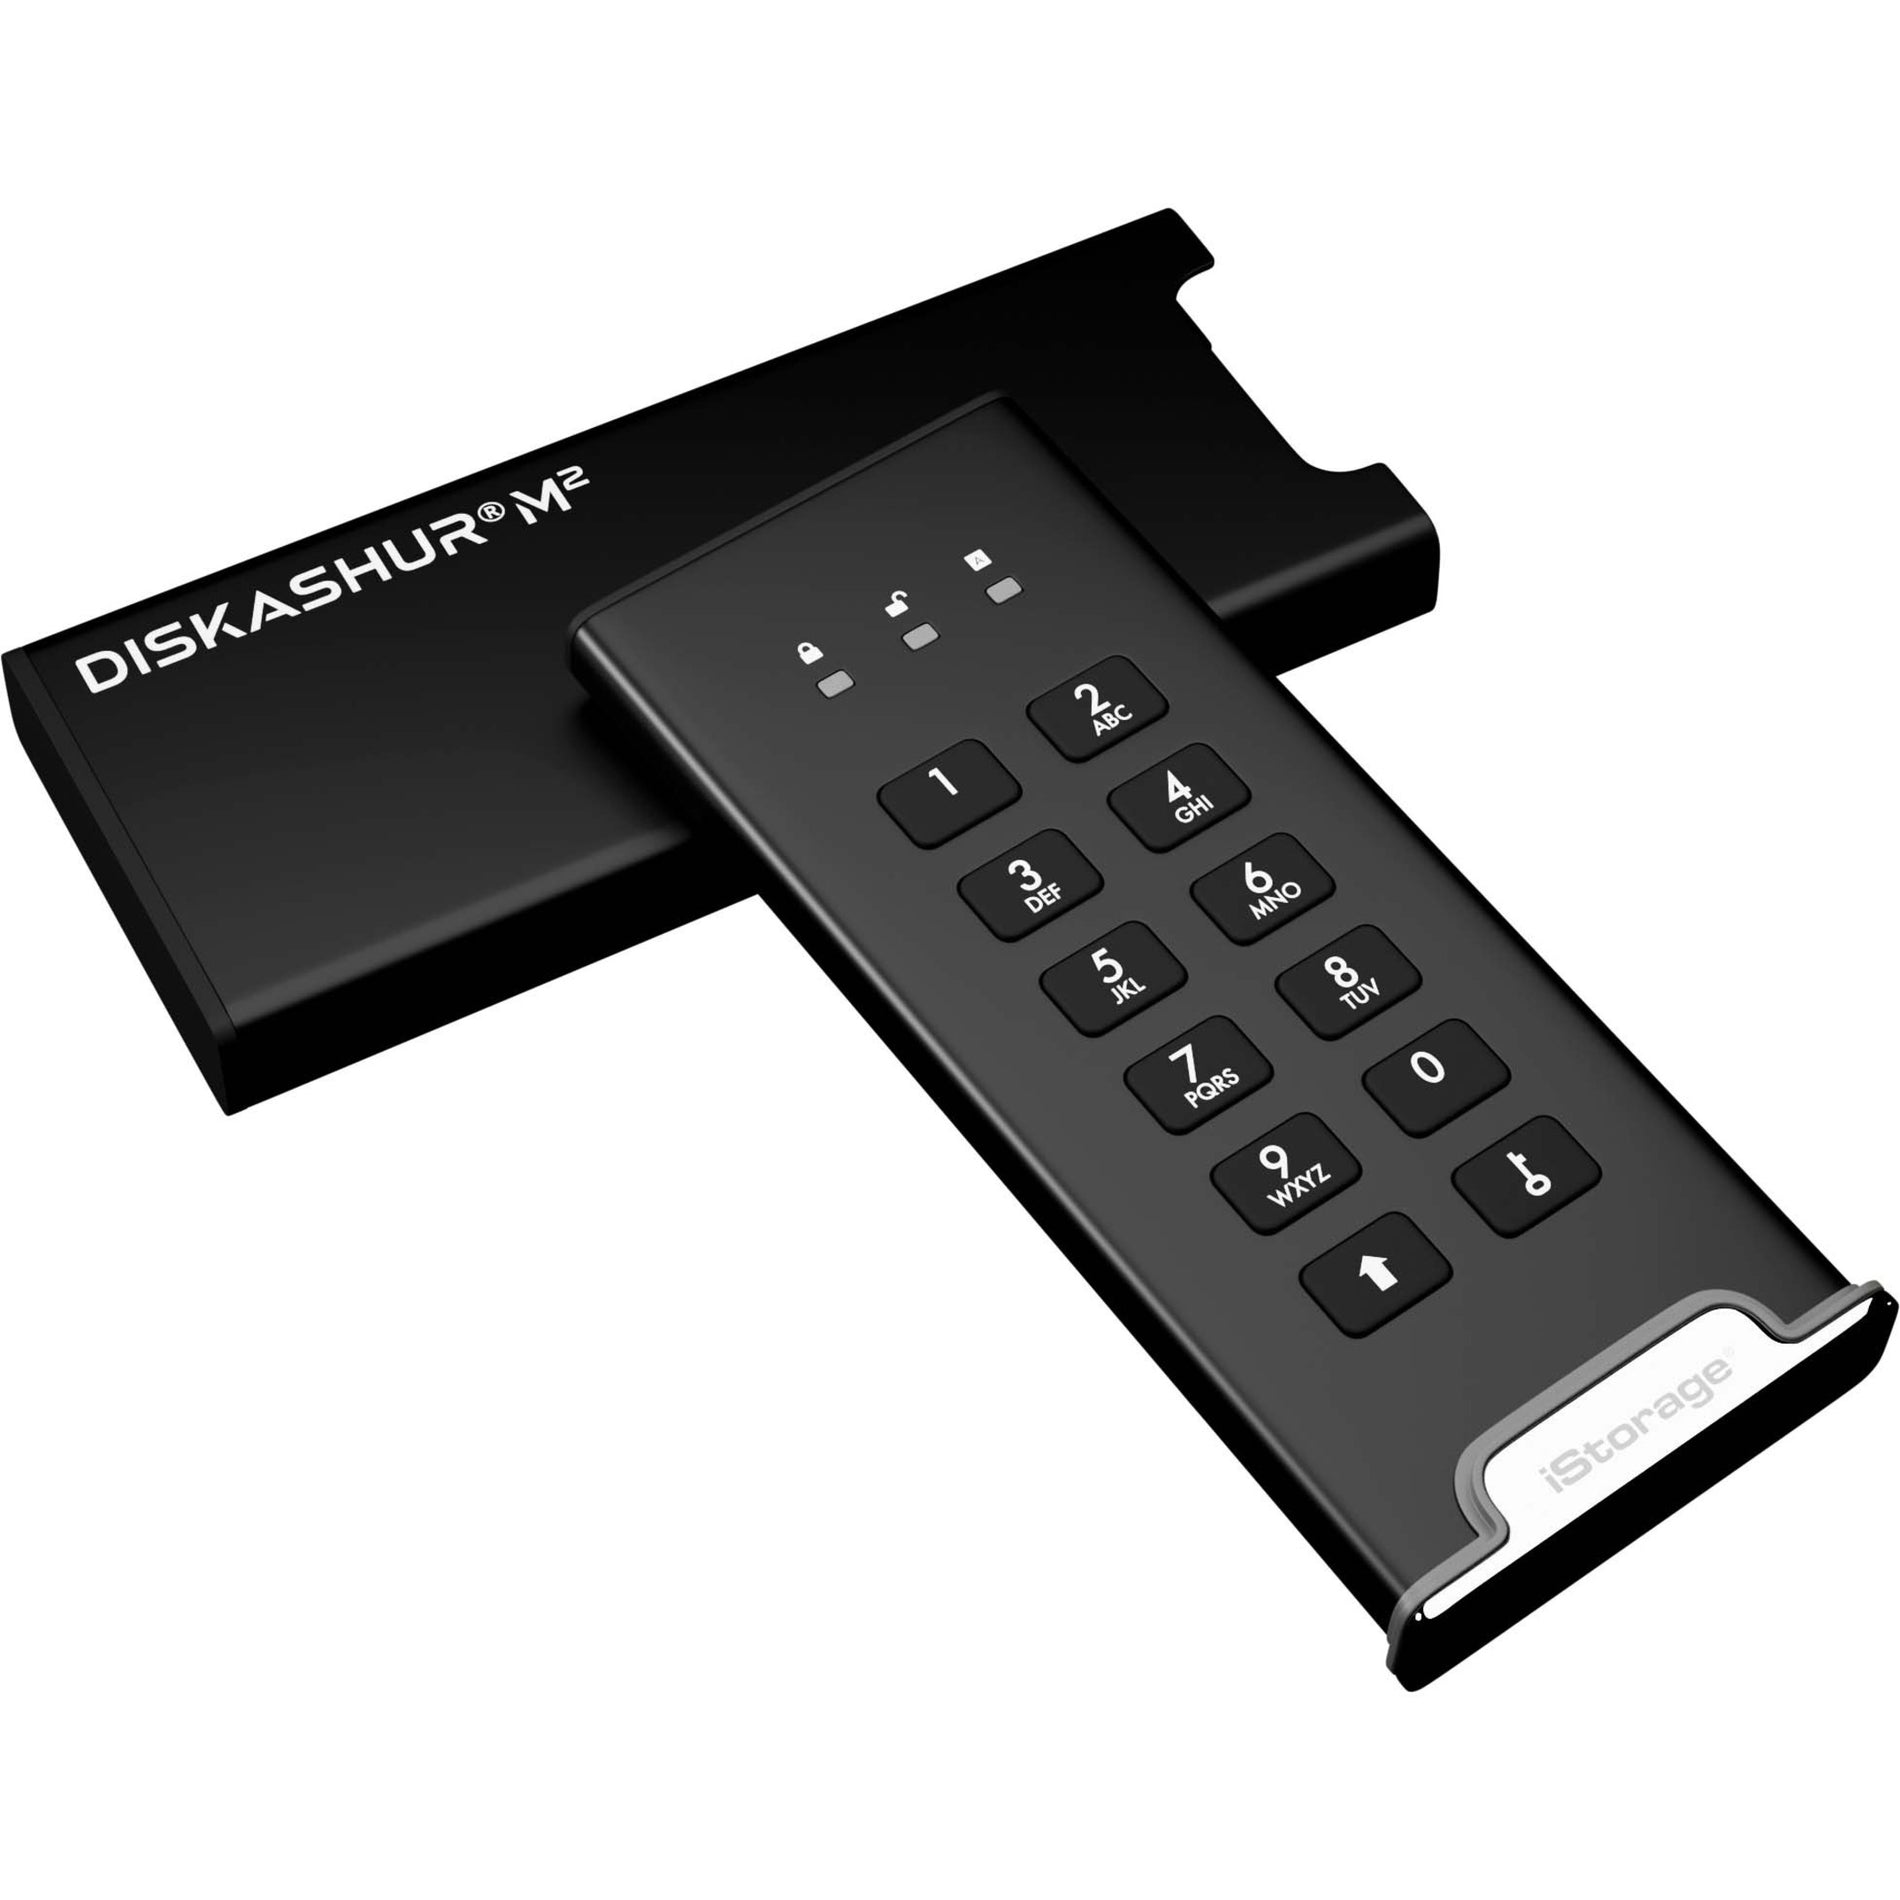 iStorage IS-DAM2-256-2000 diskAshur M2 Portable SSD, 2TB, PIN Authenticated, Hardware Encrypted, USB 3.2, Ultra-fast, FIPS Compliant, Rugged & Portable